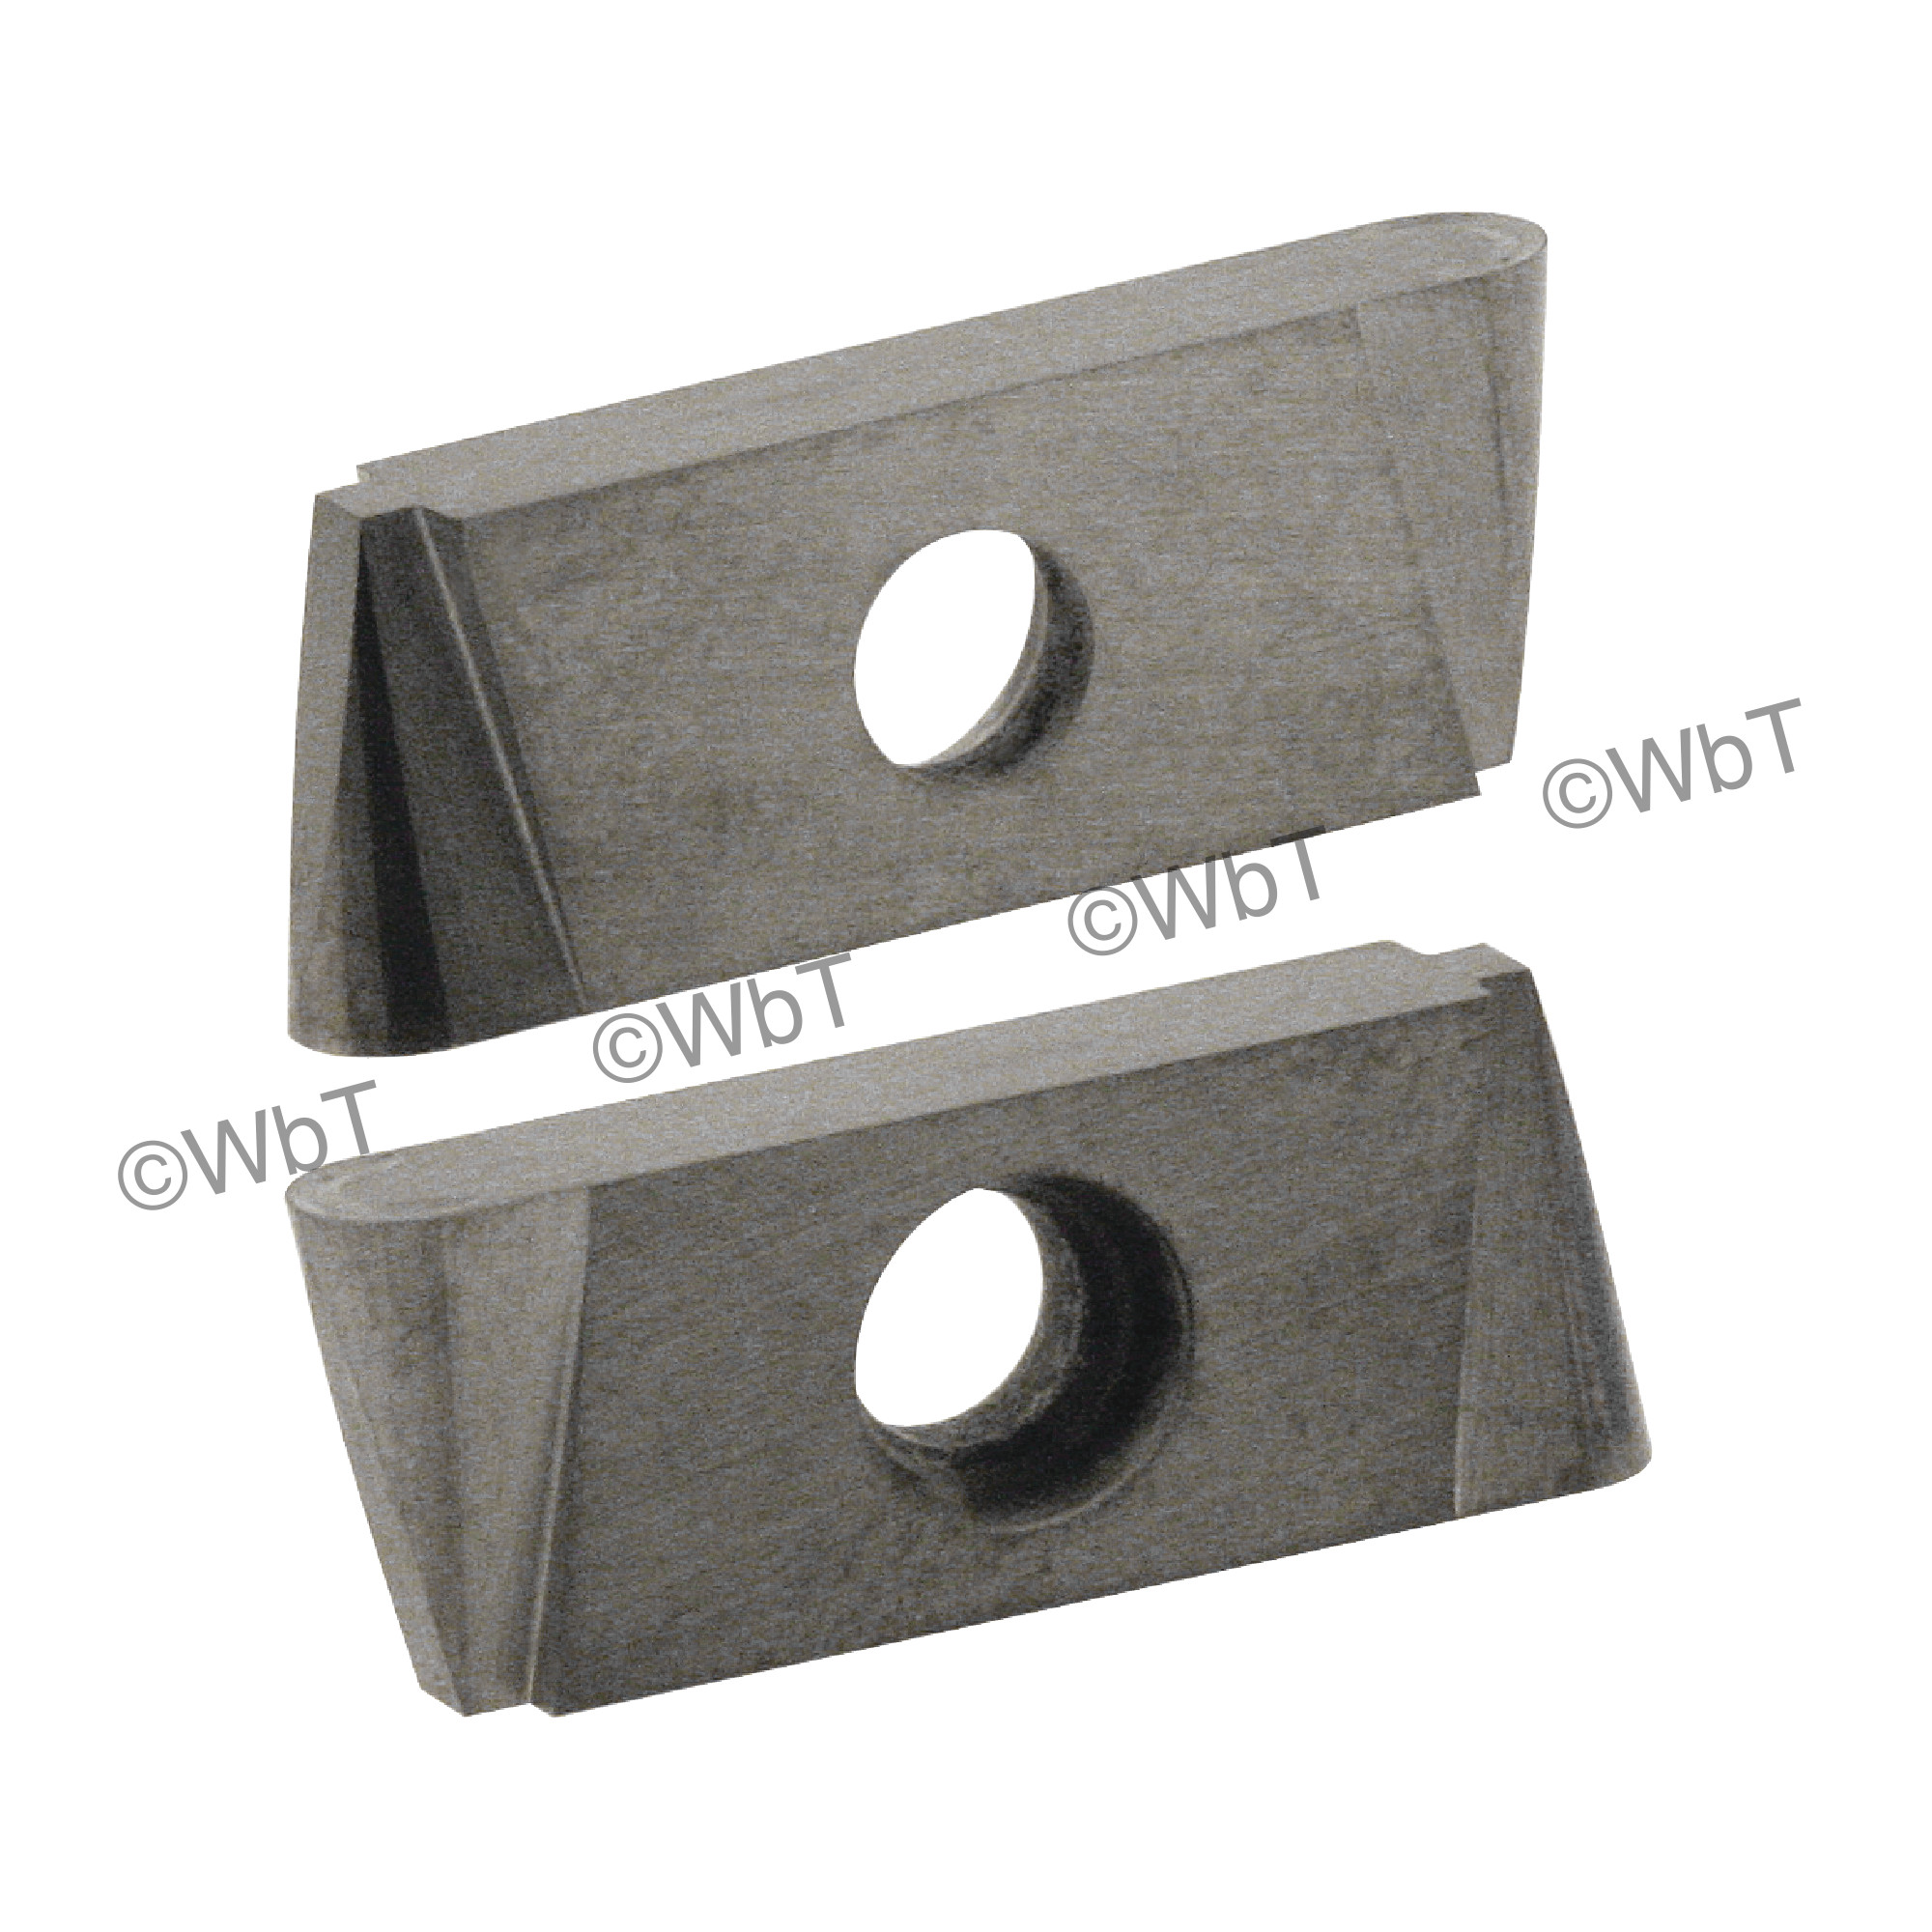 NIKCOLE - GIE-7-SC-3-R C2 / Indexable Carbide Insert for Profiling / 0.125" Cutting Width / Right Hand